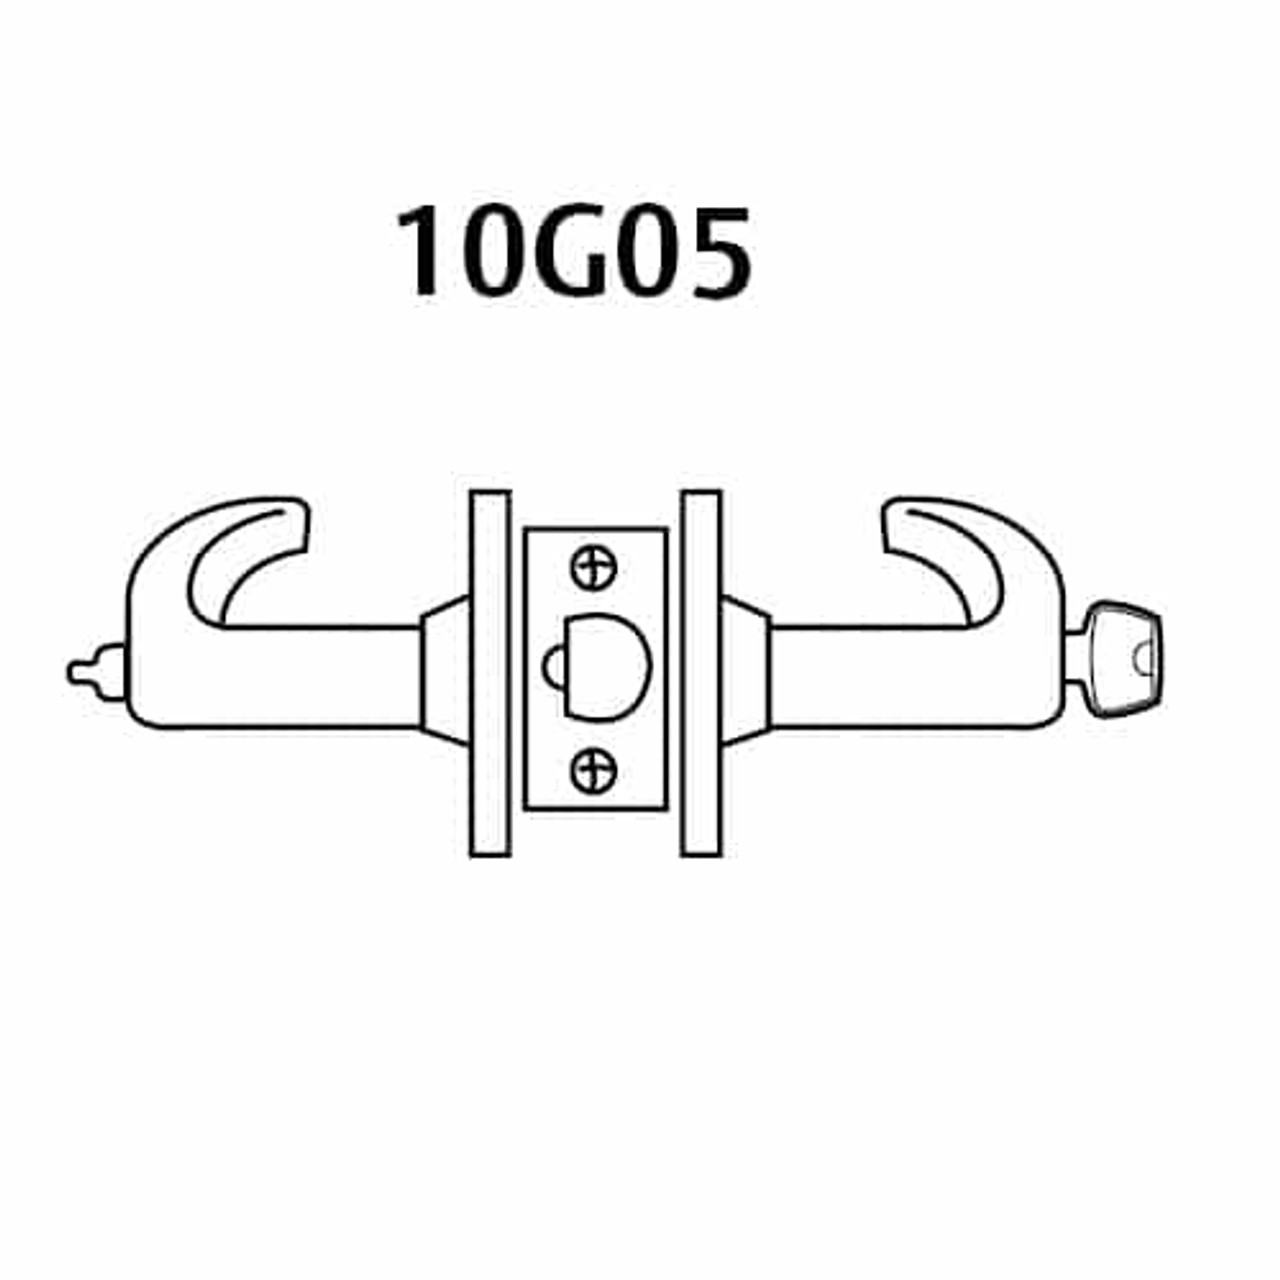 2860-10G05-LP-10B Sargent 10 Line Cylindrical Entry/Office Locks with P Lever Design and L Rose Prepped for LFIC in Oxidized Dull Bronze